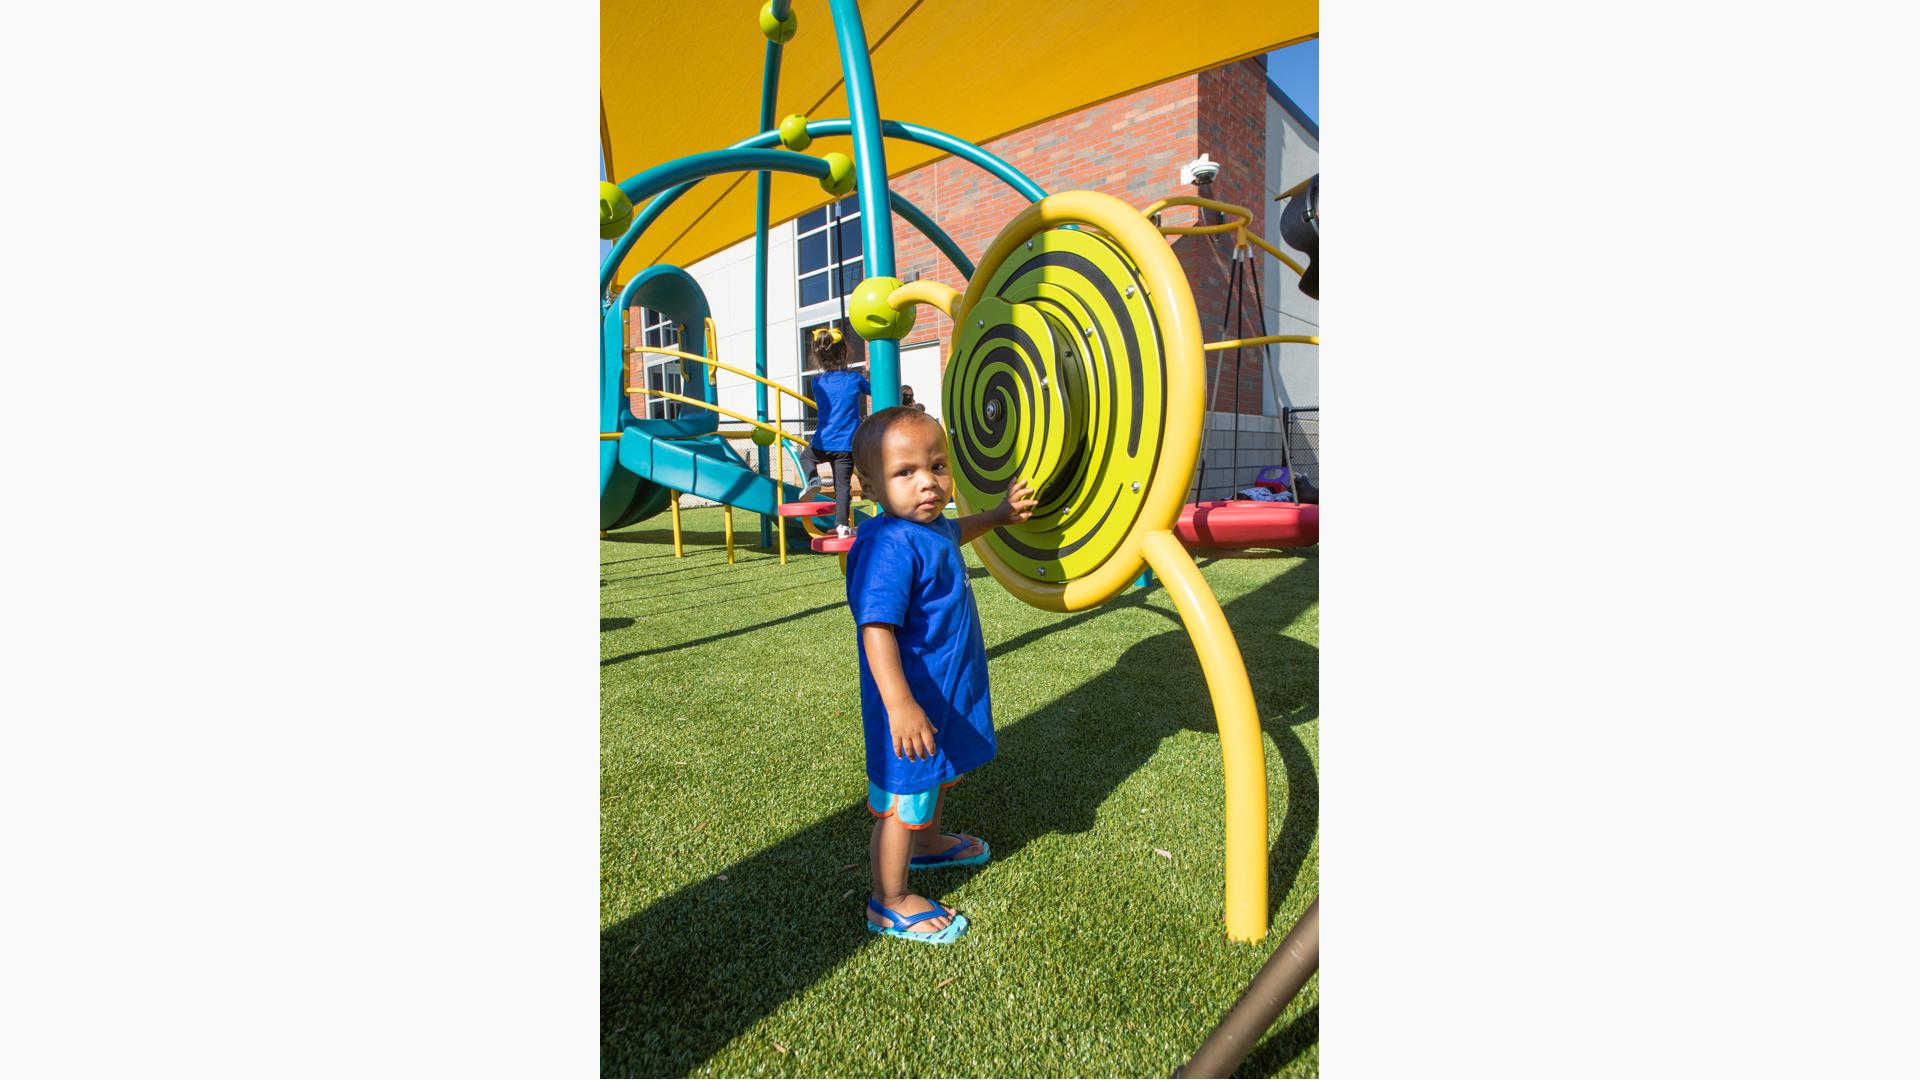 Boy in blue shirt and sandals playing with learning wall element